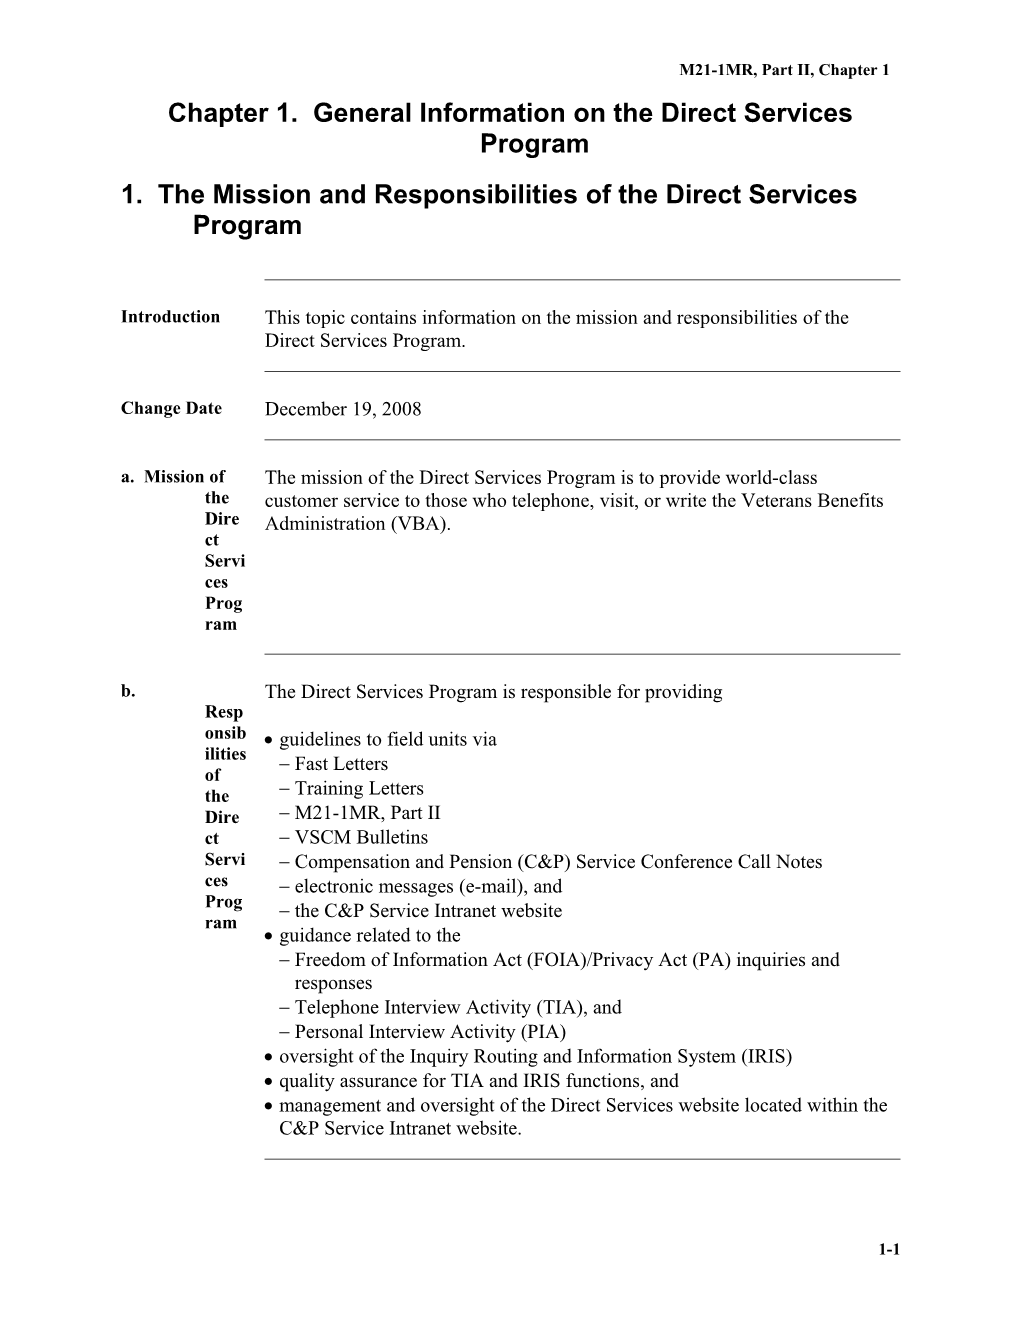 Part II, Chapter 1. General Information on the Direct Services Program